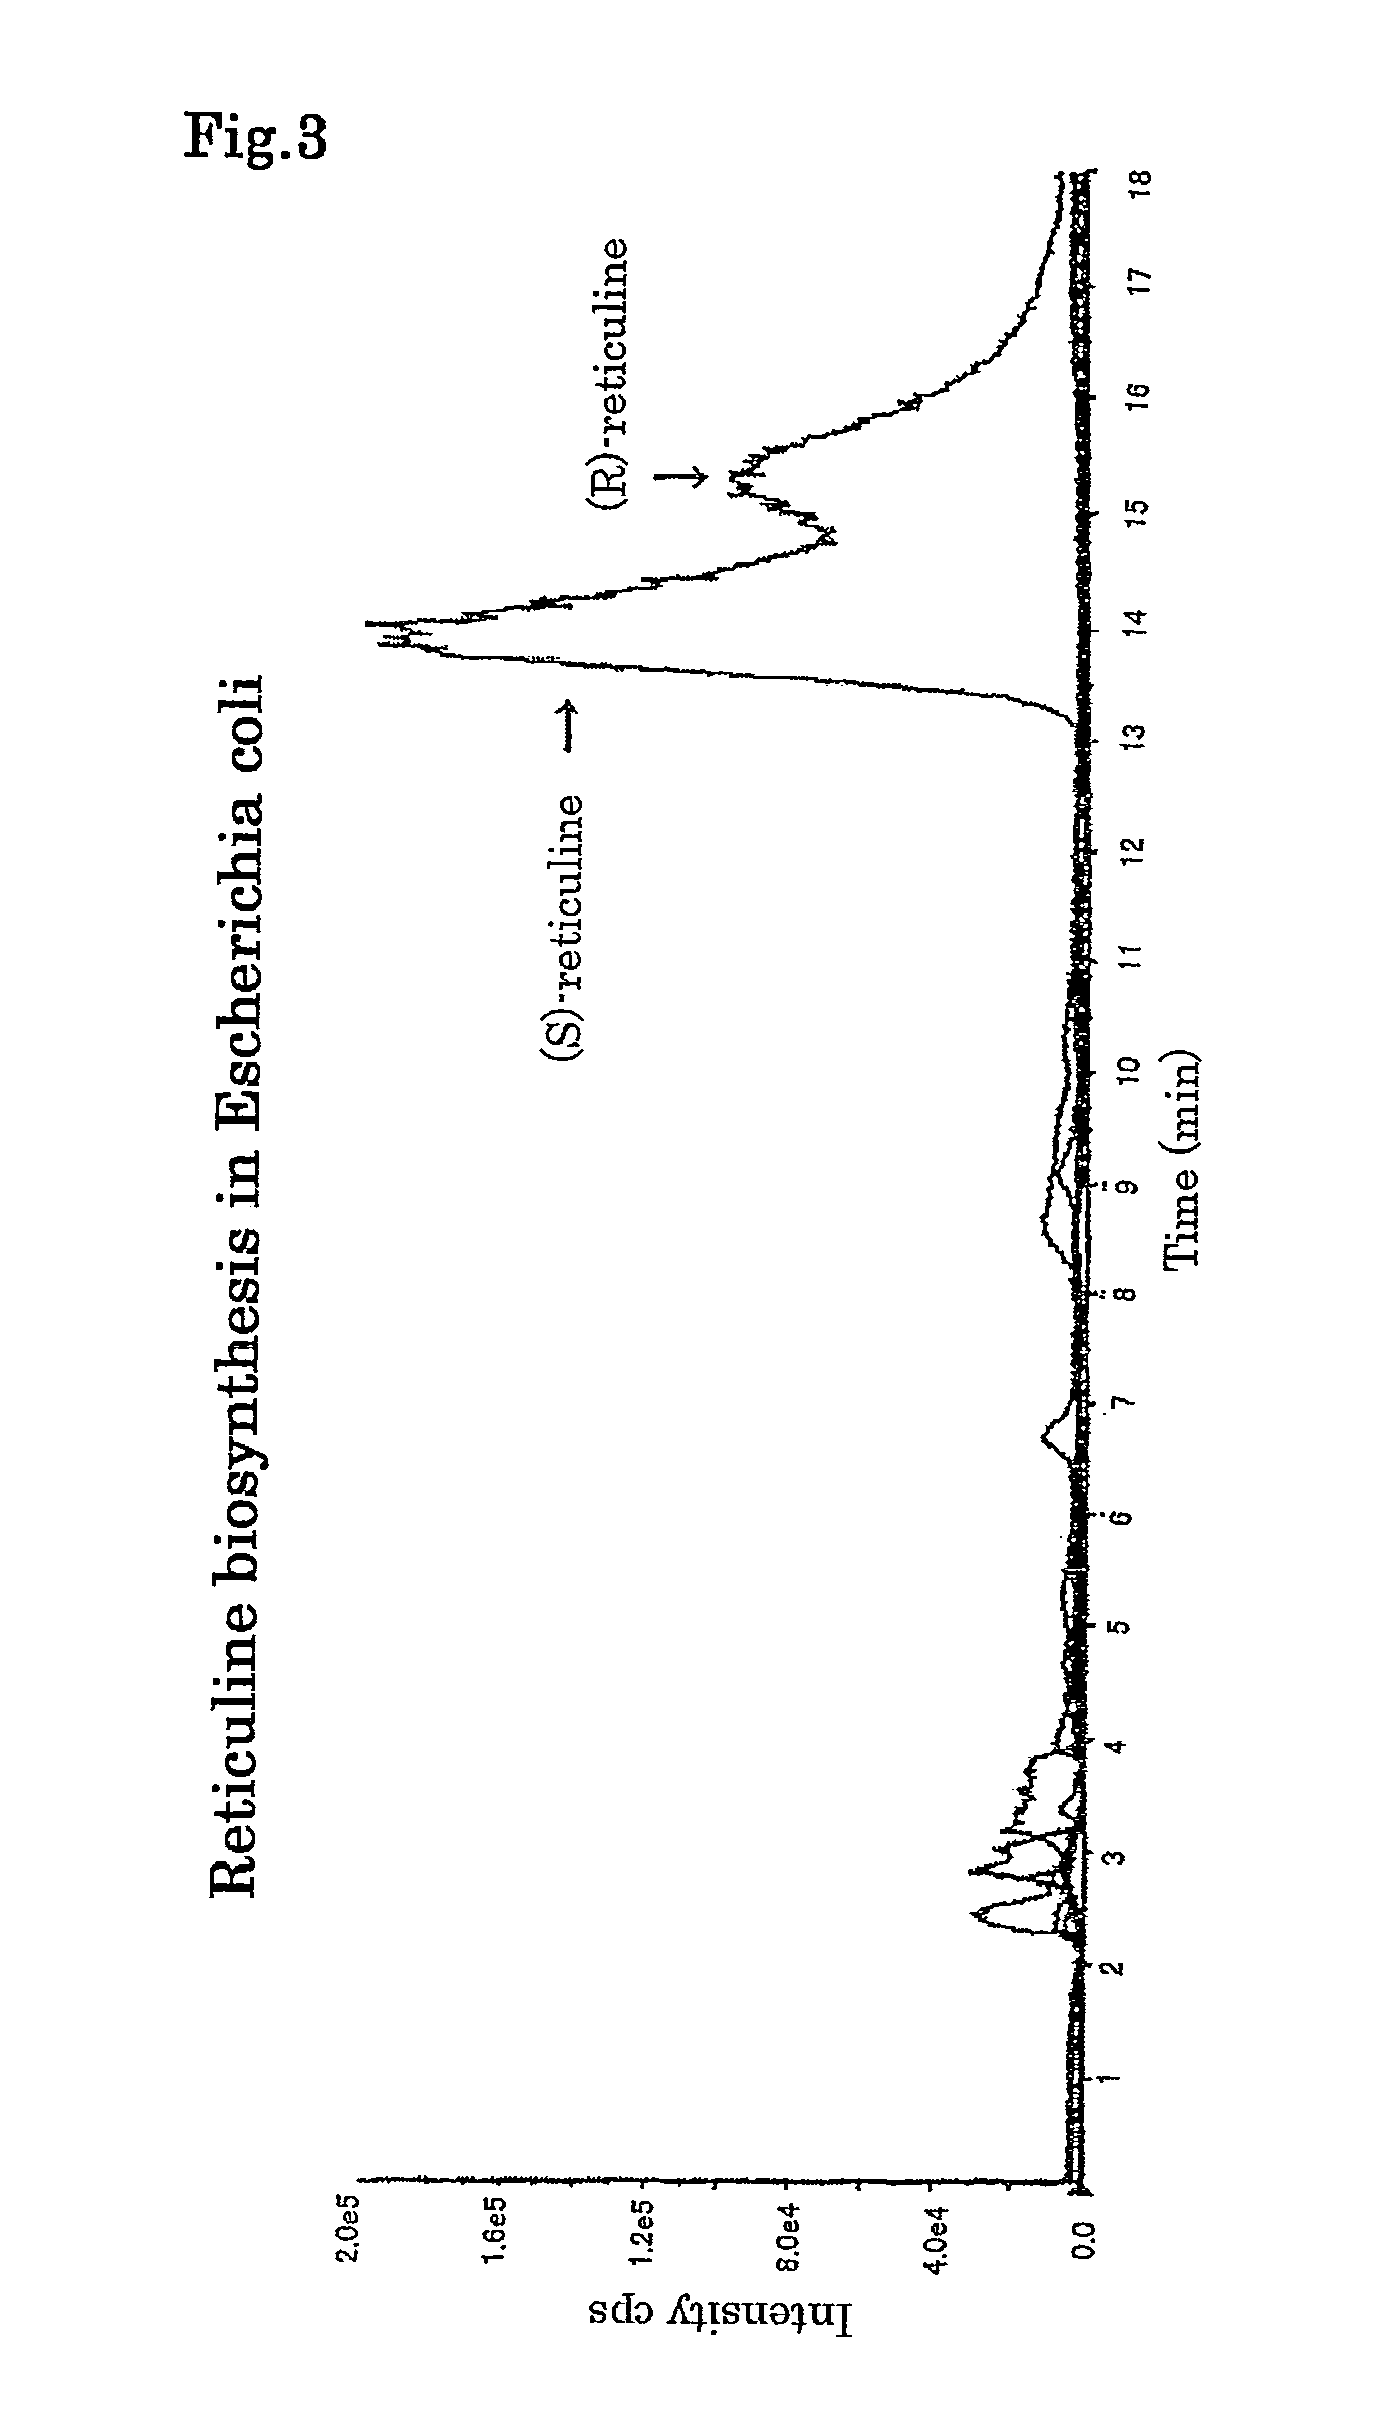 Method for producing alkaloids